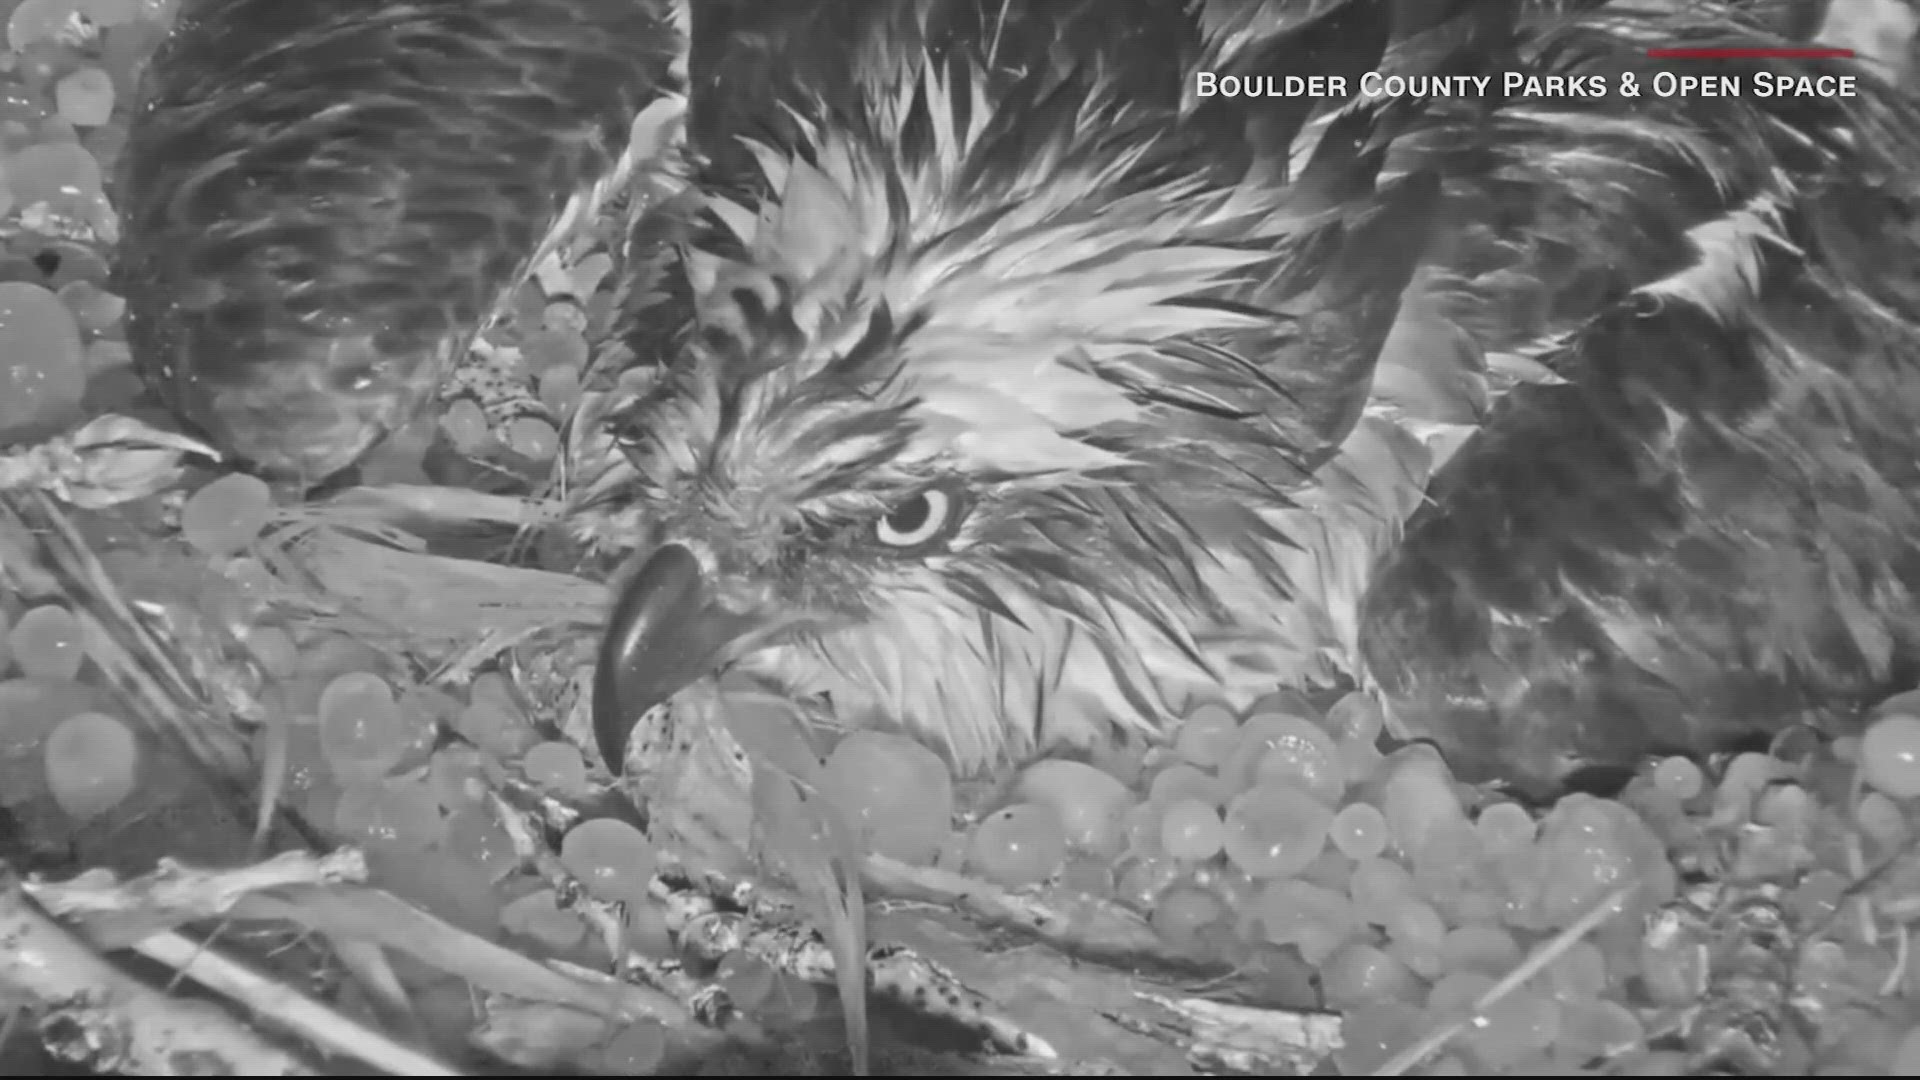 The female osprey nesting at the Boulder County Fairgrounds was "relentless" in protecting her eggs through the hailstorm that pounded northern Colorado.